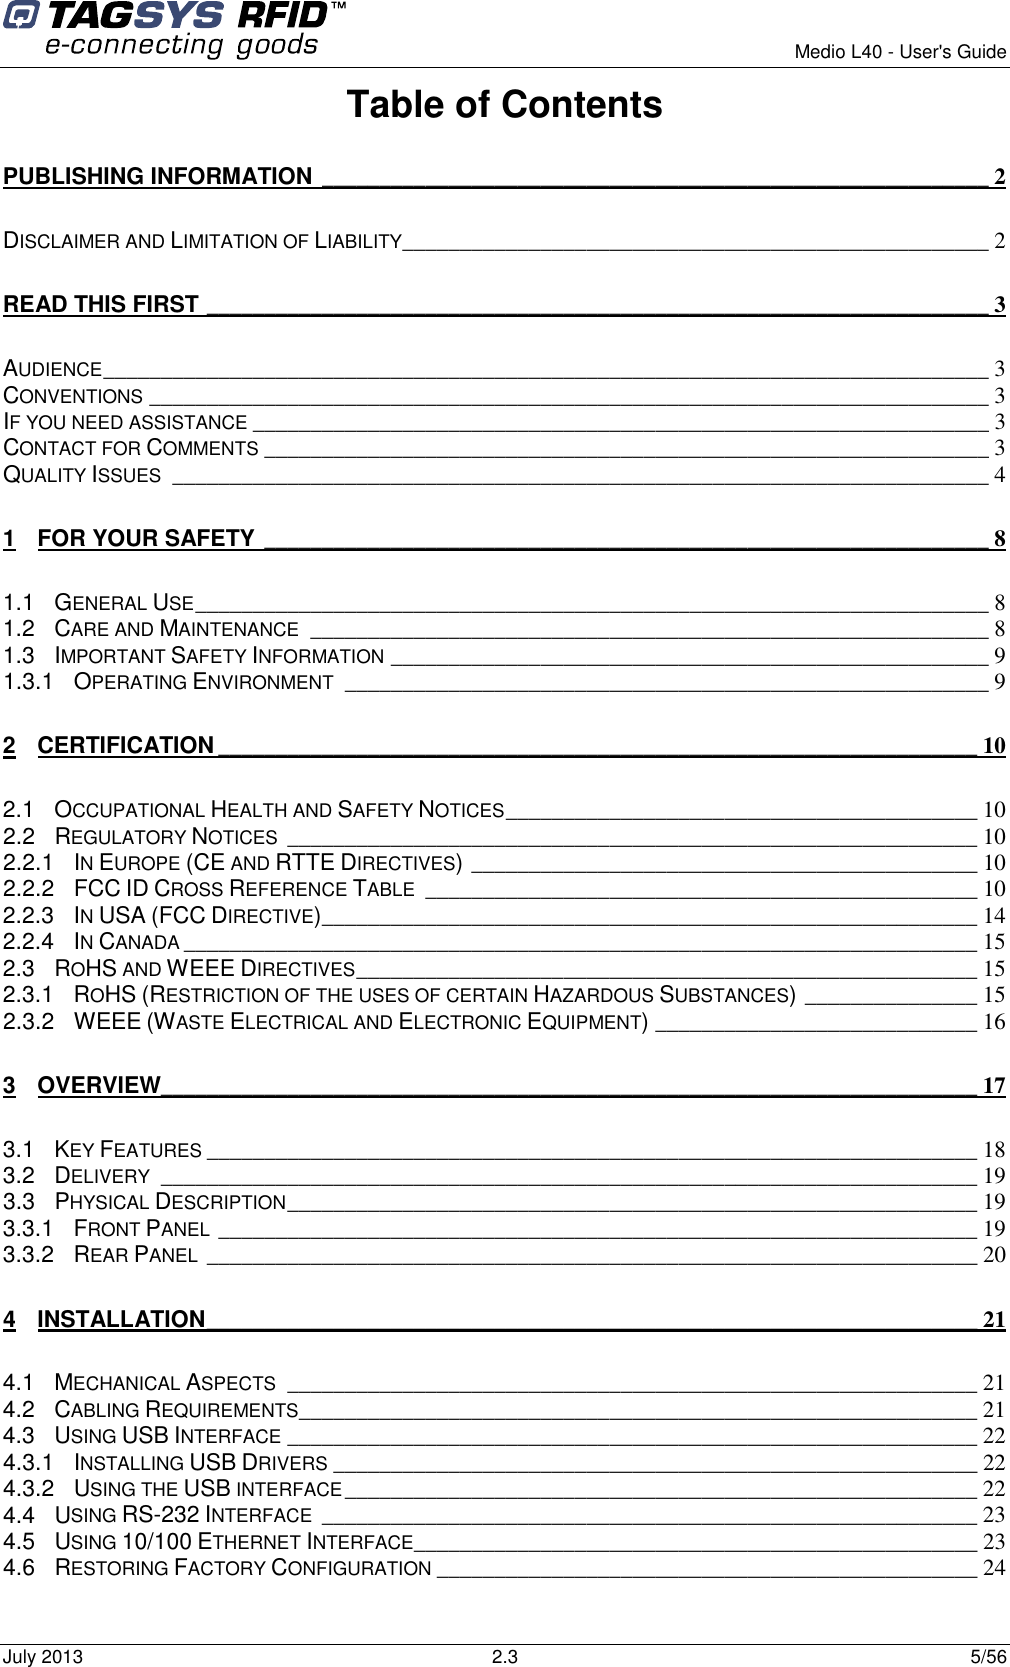        Medio L40 - User&apos;s Guide July 2013  2.3  5/56  Table of Contents PUBLISHING INFORMATION __________________________________________________________ 2 DISCLAIMER AND LIMITATION OF LIABILITY ___________________________________________________ 2 READ THIS FIRST ____________________________________________________________________ 3 AUDIENCE _____________________________________________________________________________ 3 CONVENTIONS _________________________________________________________________________ 3 IF YOU NEED ASSISTANCE ________________________________________________________________ 3 CONTACT FOR COMMENTS _______________________________________________________________ 3 QUALITY ISSUES  _______________________________________________________________________ 4 1 FOR YOUR SAFETY _______________________________________________________________ 8 1.1 GENERAL USE _____________________________________________________________________ 8 1.2 CARE AND MAINTENANCE  ___________________________________________________________ 8 1.3 IMPORTANT SAFETY INFORMATION ____________________________________________________ 9 1.3.1 OPERATING ENVIRONMENT  ________________________________________________________ 9 2 CERTIFICATION __________________________________________________________________ 10 2.1 OCCUPATIONAL HEALTH AND SAFETY NOTICES _________________________________________ 10 2.2 REGULATORY NOTICES  ____________________________________________________________ 10 2.2.1 IN EUROPE (CE AND RTTE DIRECTIVES) ____________________________________________ 10 2.2.2 FCC ID CROSS REFERENCE TABLE  ________________________________________________ 10 2.2.3 IN USA (FCC DIRECTIVE) _________________________________________________________ 14 2.2.4 IN CANADA _____________________________________________________________________ 15 2.3 ROHS AND WEEE DIRECTIVES ______________________________________________________ 15 2.3.1 ROHS (RESTRICTION OF THE USES OF CERTAIN HAZARDOUS SUBSTANCES) _______________ 15 2.3.2 WEEE (WASTE ELECTRICAL AND ELECTRONIC EQUIPMENT) ____________________________ 16 3 OVERVIEW_______________________________________________________________________ 17 3.1 KEY FEATURES ___________________________________________________________________ 18 3.2 DELIVERY  _______________________________________________________________________ 19 3.3 PHYSICAL DESCRIPTION ____________________________________________________________ 19 3.3.1 FRONT PANEL __________________________________________________________________ 19 3.3.2 REAR PANEL ___________________________________________________________________ 20 4 INSTALLATION ___________________________________________________________________ 21 4.1 MECHANICAL ASPECTS  ____________________________________________________________ 21 4.2 CABLING REQUIREMENTS___________________________________________________________ 21 4.3 USING USB INTERFACE ____________________________________________________________ 22 4.3.1 INSTALLING USB DRIVERS ________________________________________________________ 22 4.3.2 USING THE USB INTERFACE _______________________________________________________ 22 4.4 USING RS-232 INTERFACE  _________________________________________________________ 23 4.5 USING 10/100 ETHERNET INTERFACE_________________________________________________ 23 4.6 RESTORING FACTORY CONFIGURATION _______________________________________________ 24 